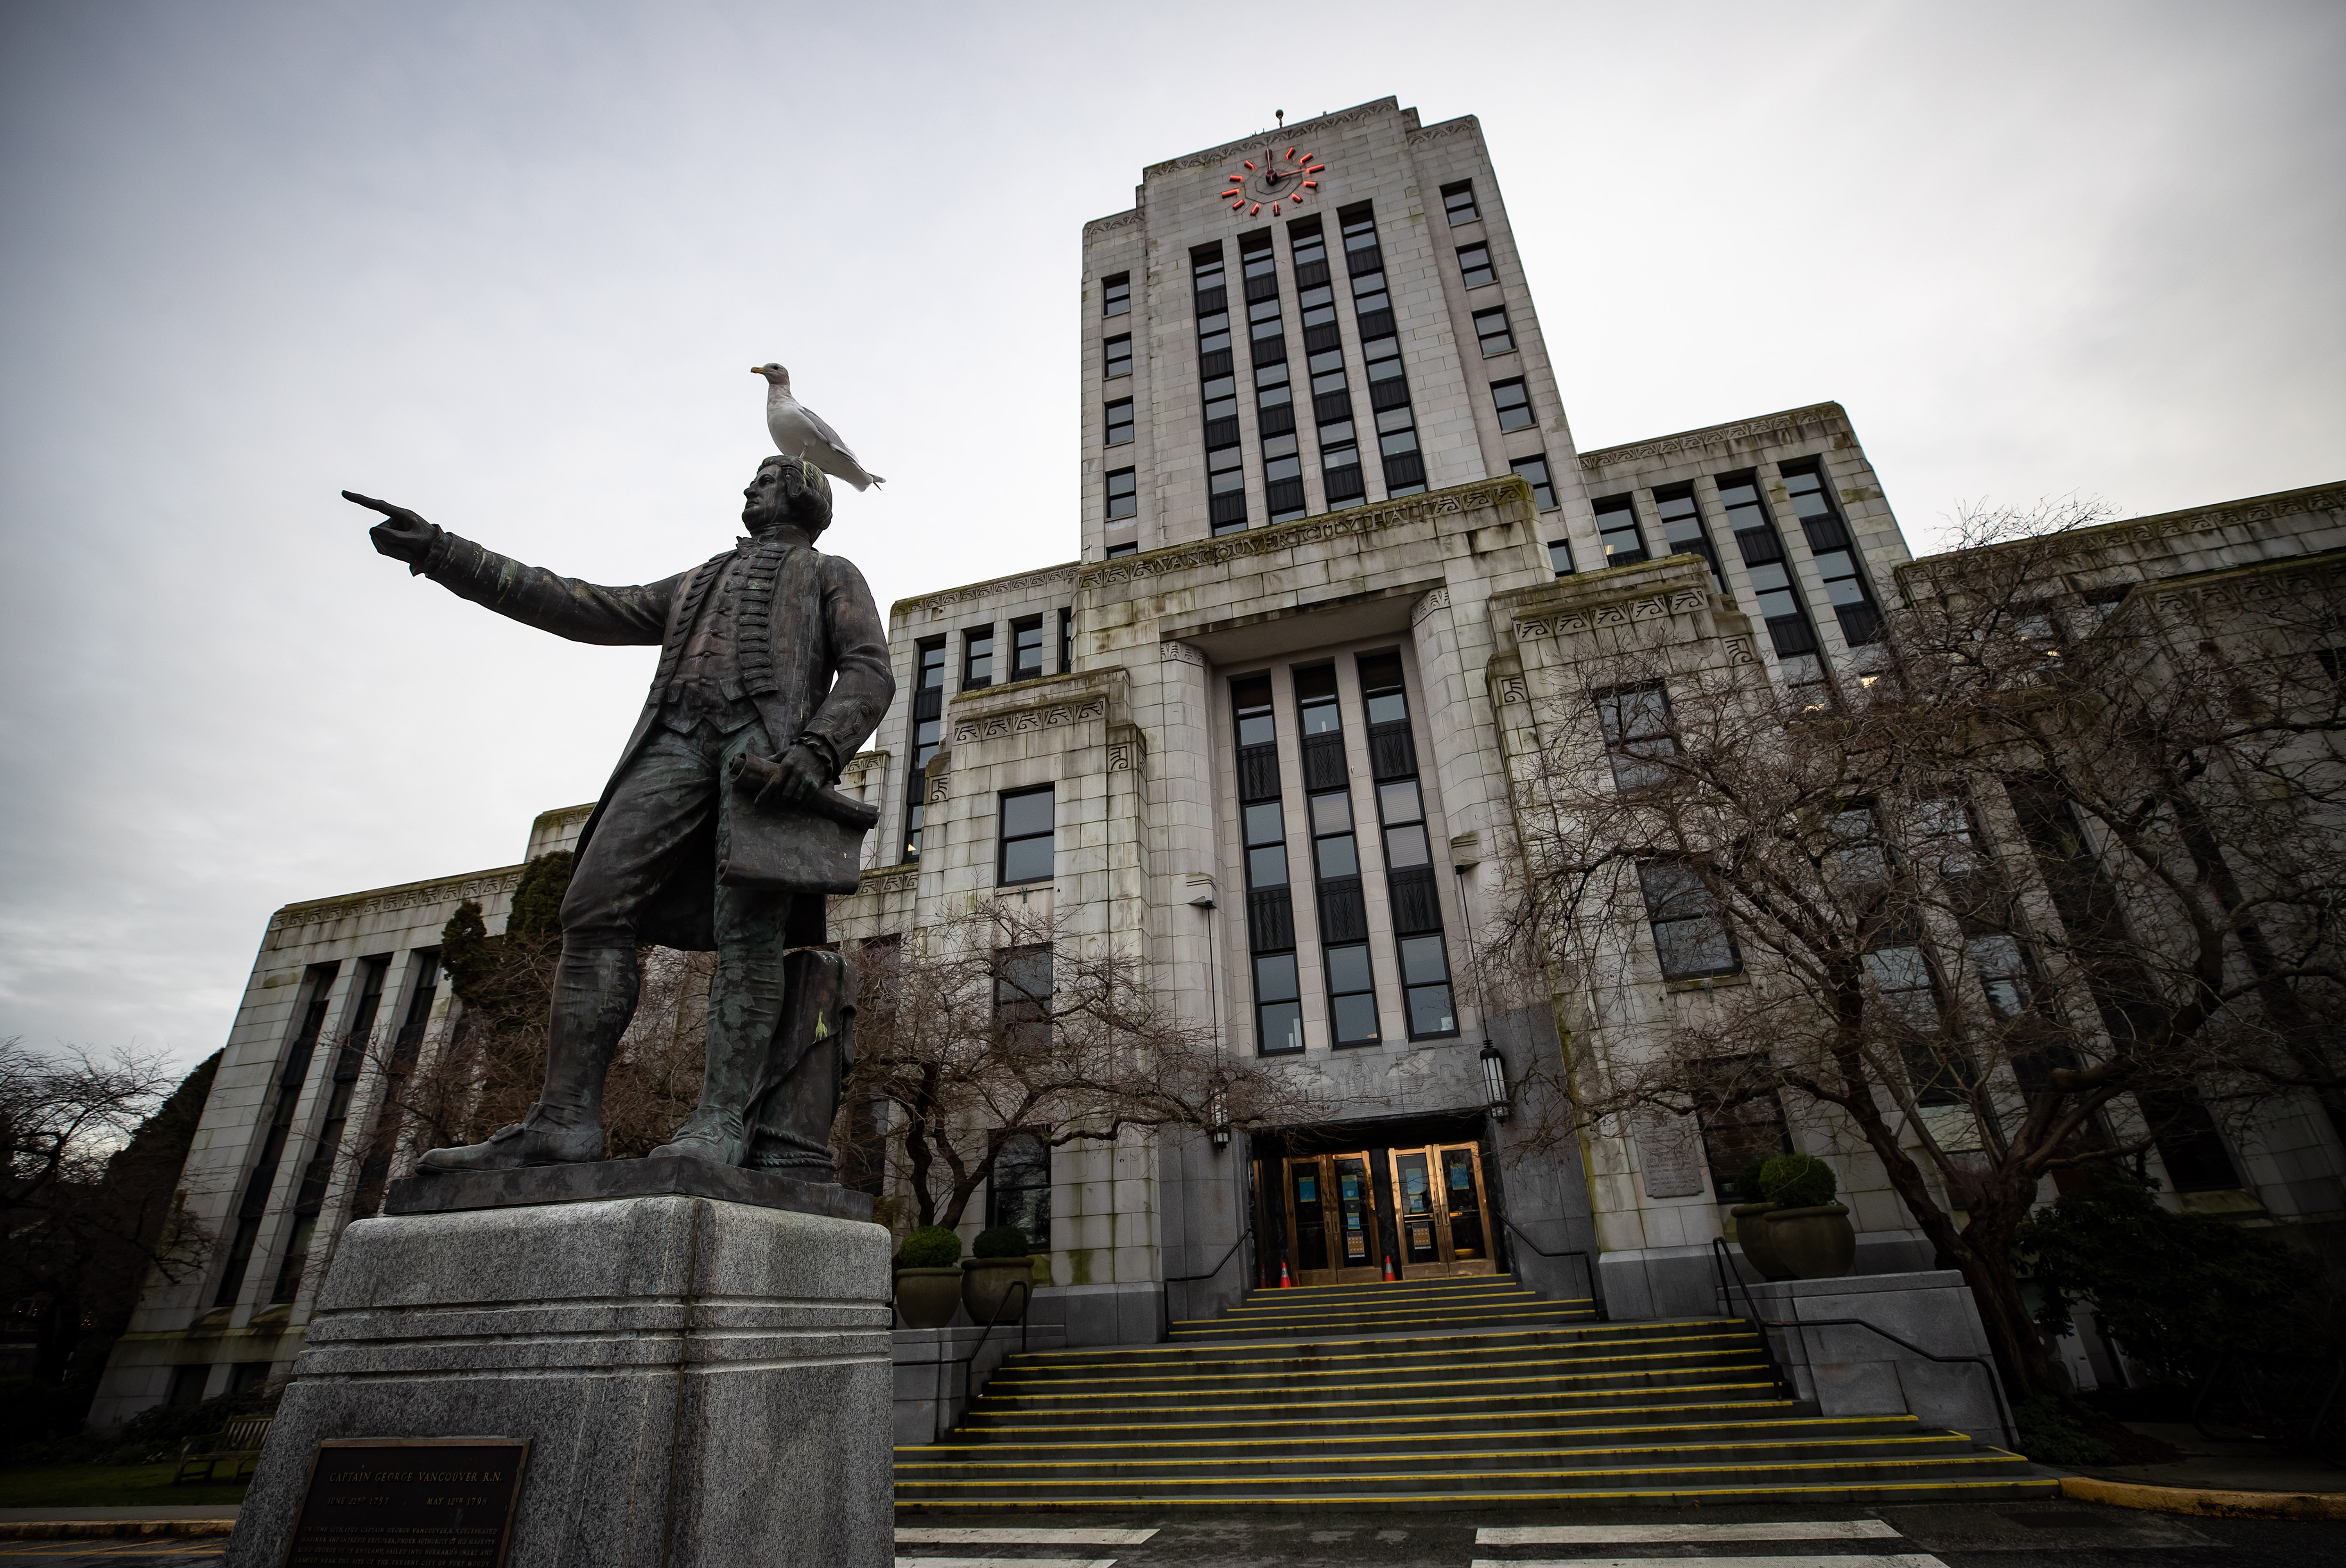 Vancouver City Hall is seen in Vancouver on Saturday, Jan. 9, 2021. (Darryl Dyck / THE CANADIAN PRESS)